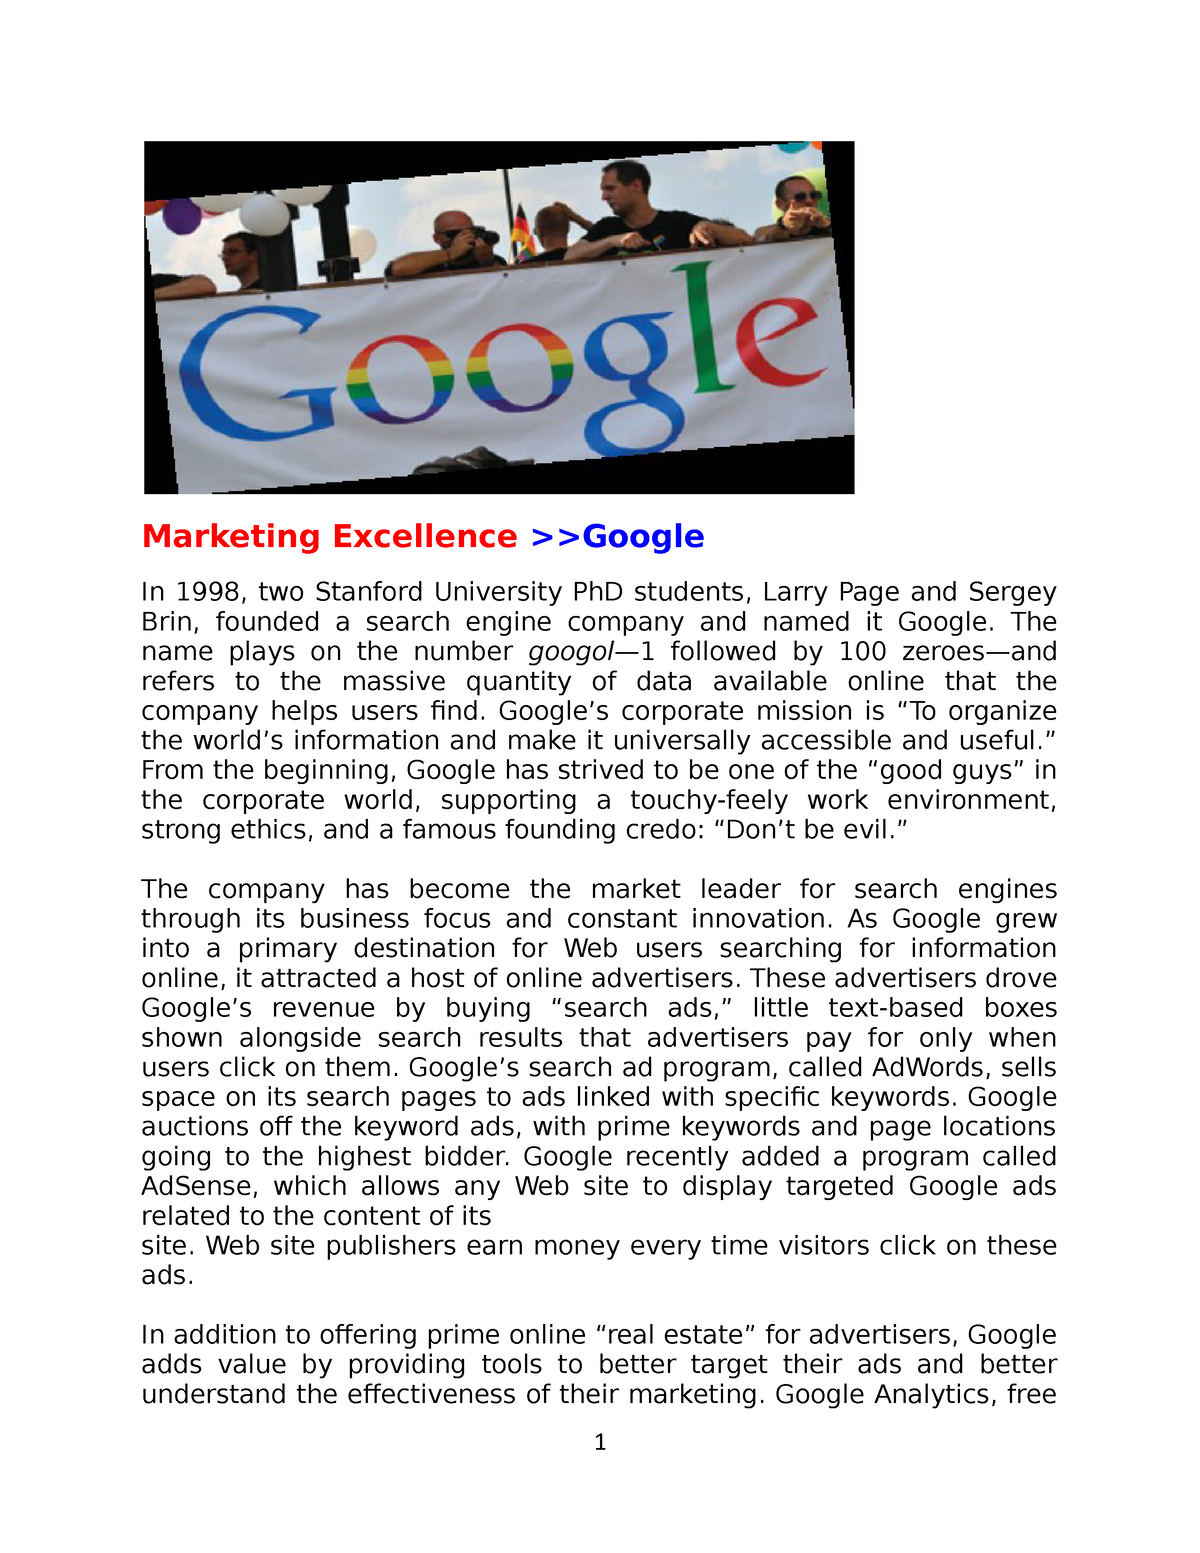 google case study marketing excellence